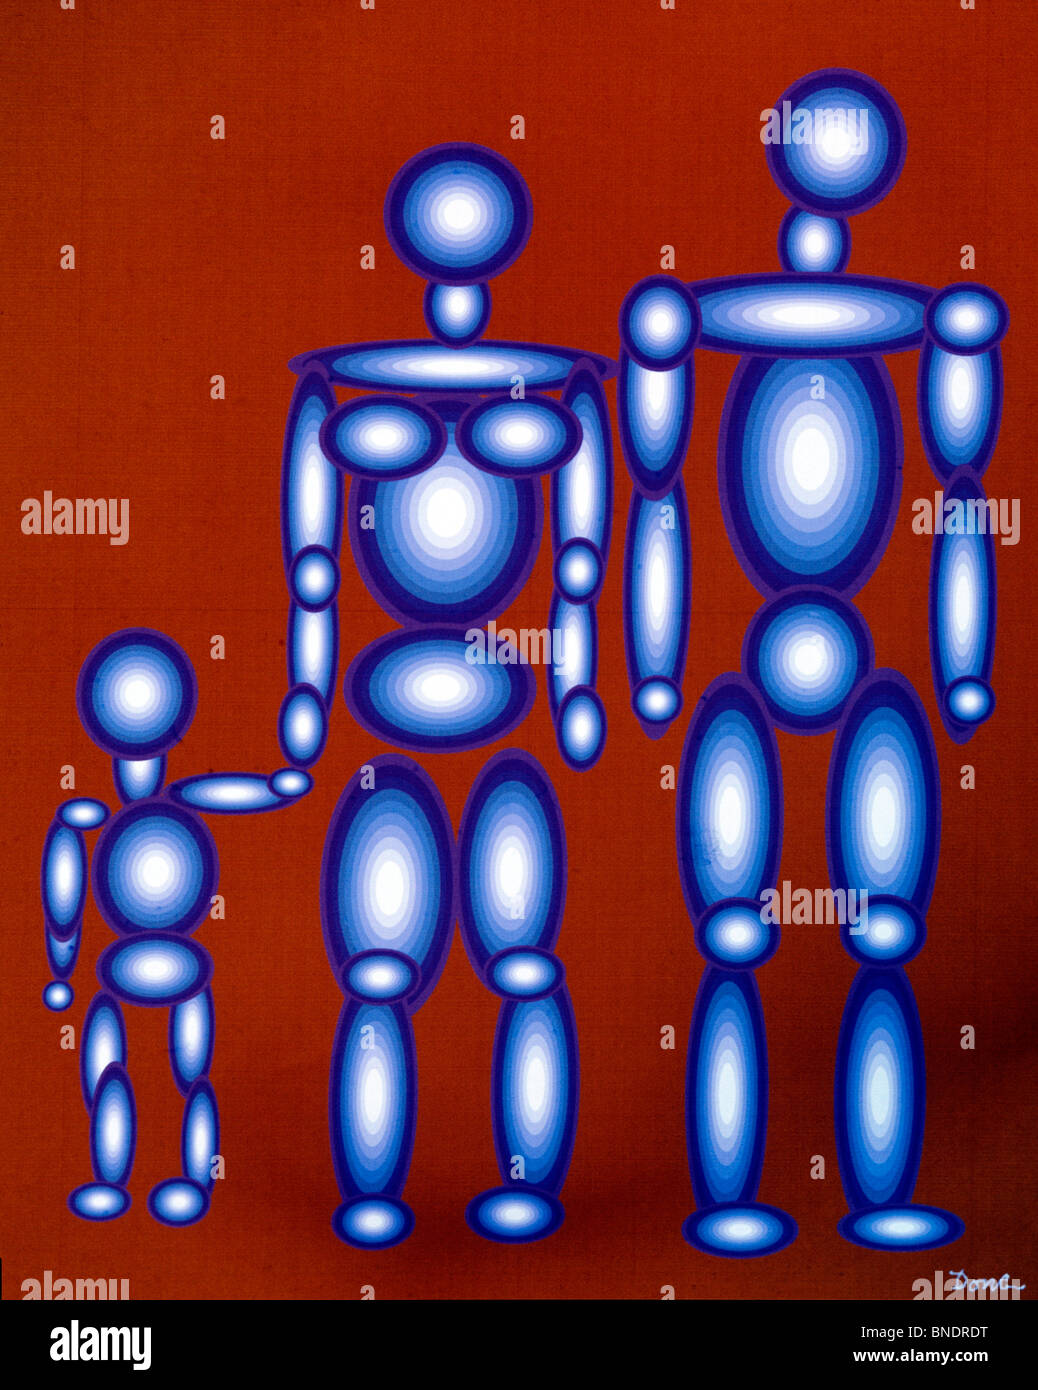 Tin Family  1993  Diana Ong (b.1940 Chinese-American)  Computer graphics Stock Photo